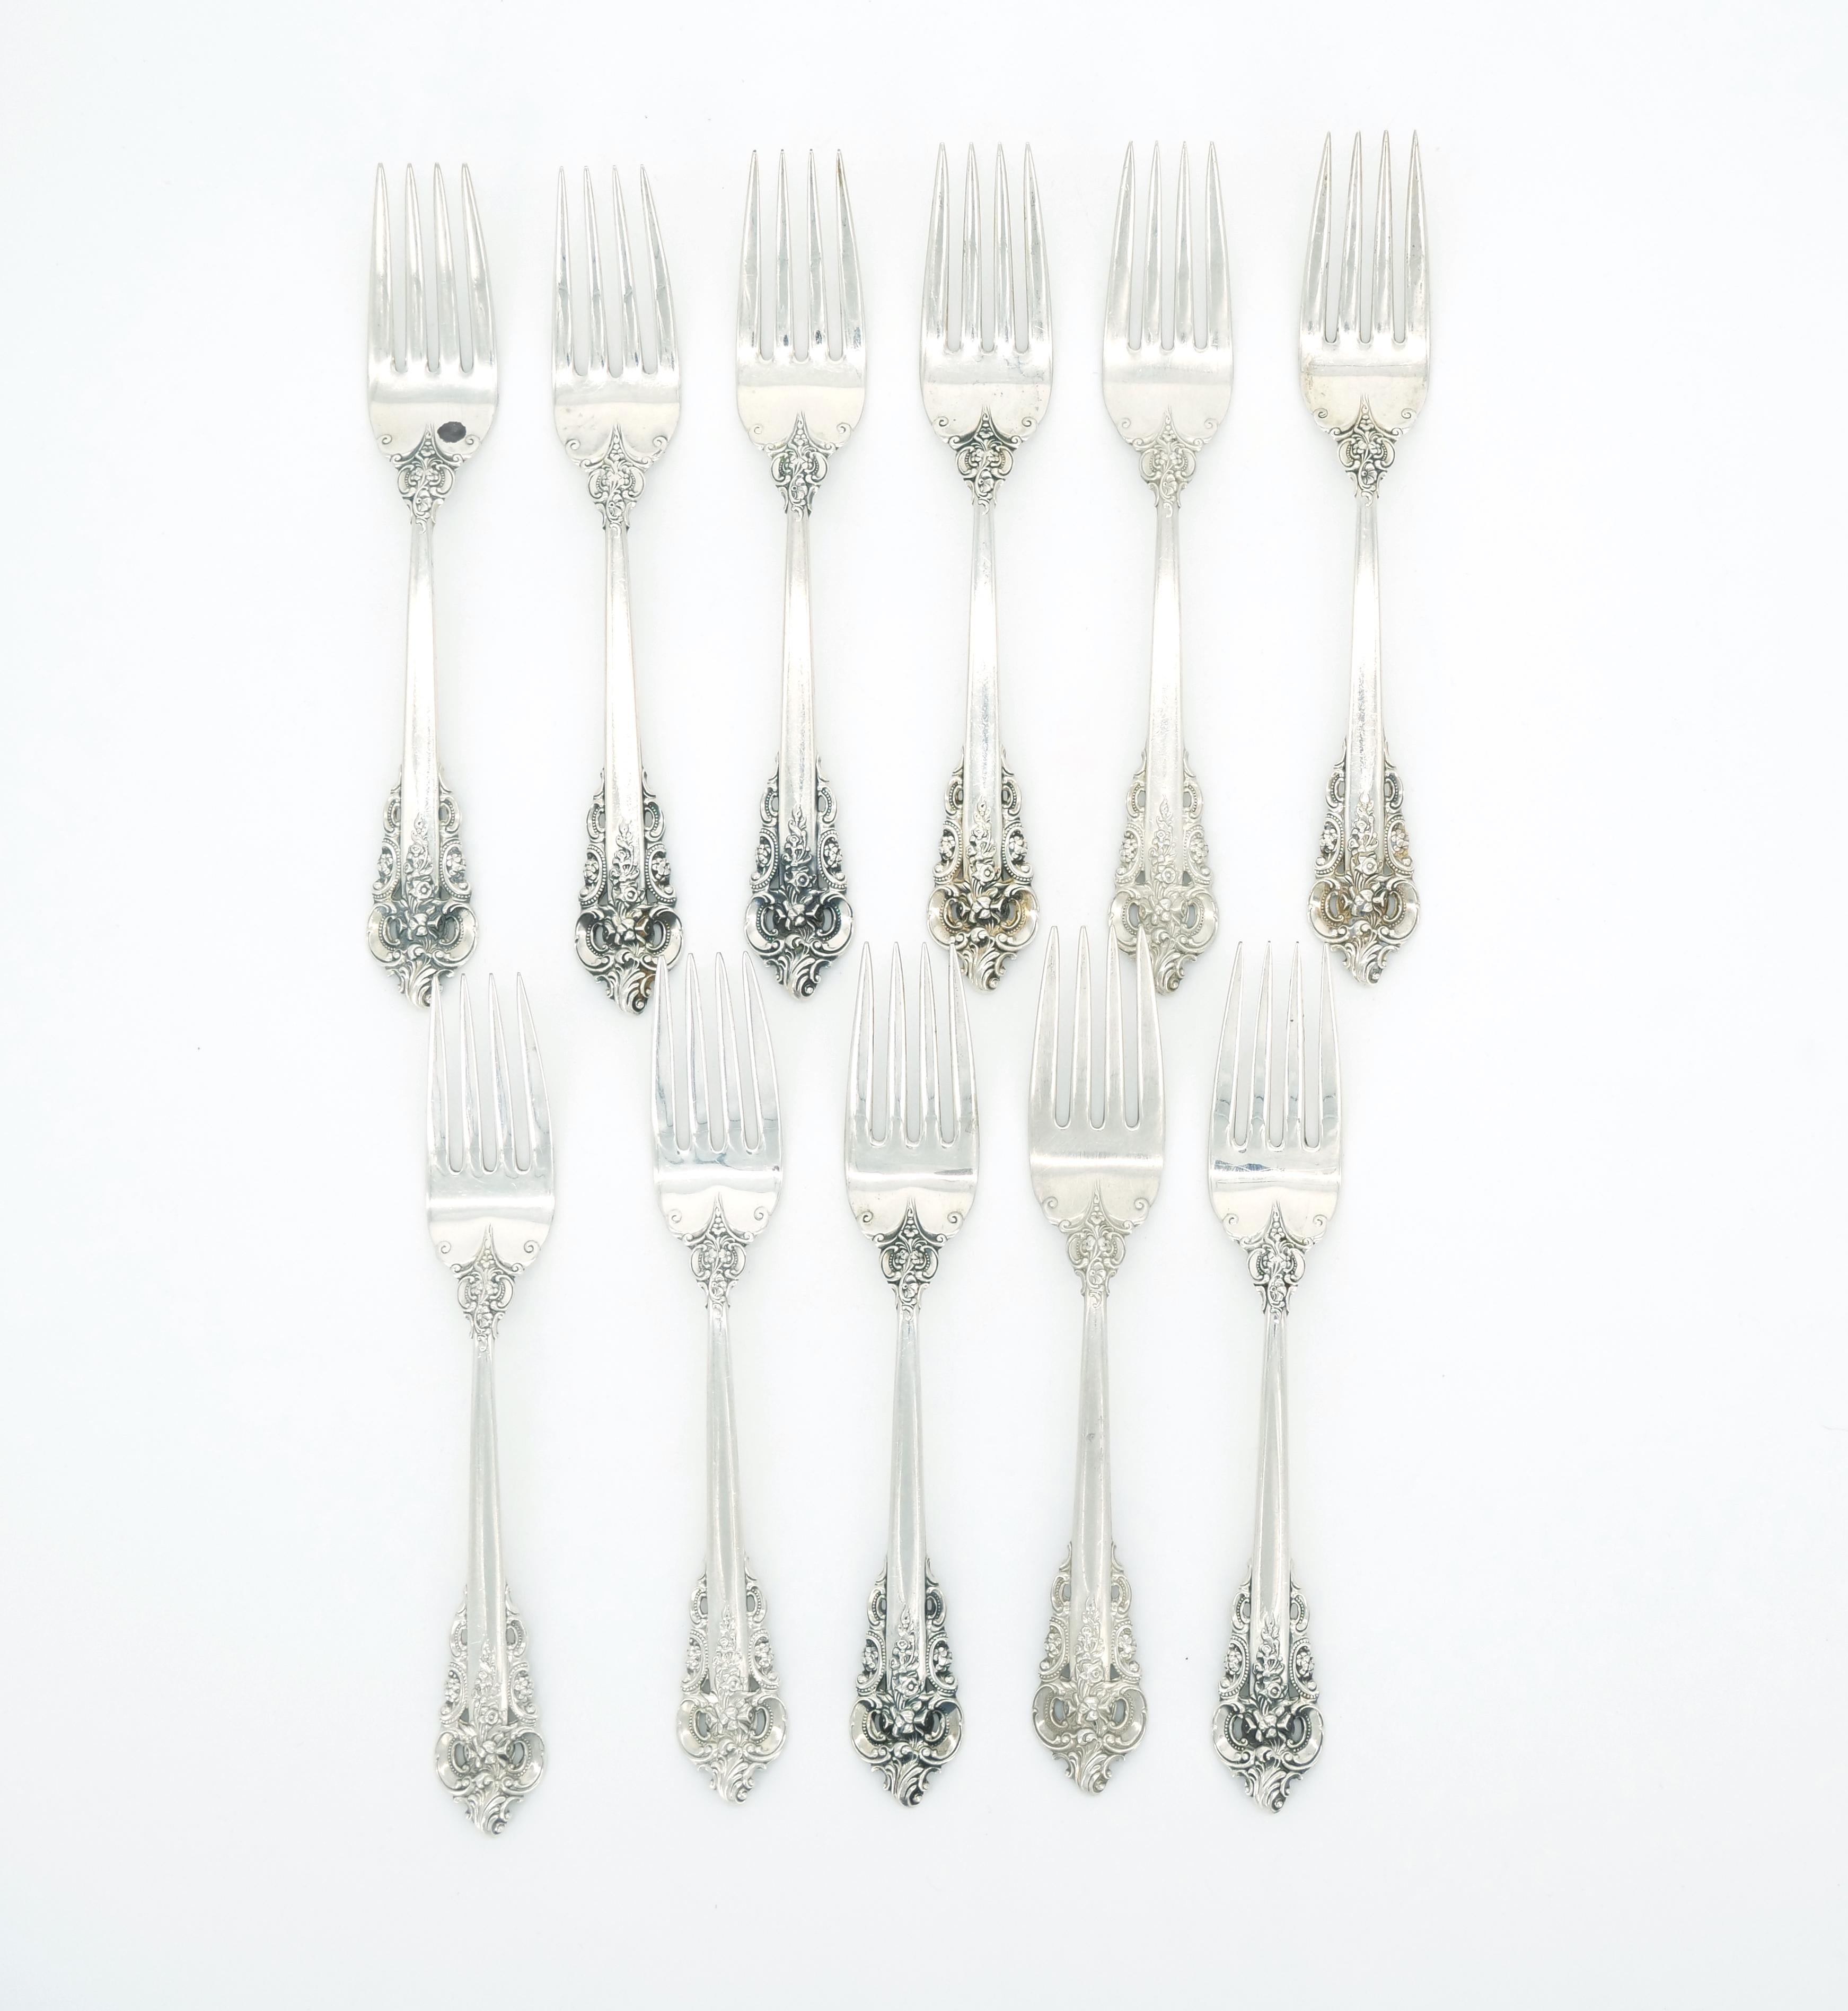 Early 20th Century Sterling Silver Flatware Service For 24 People For Sale 1